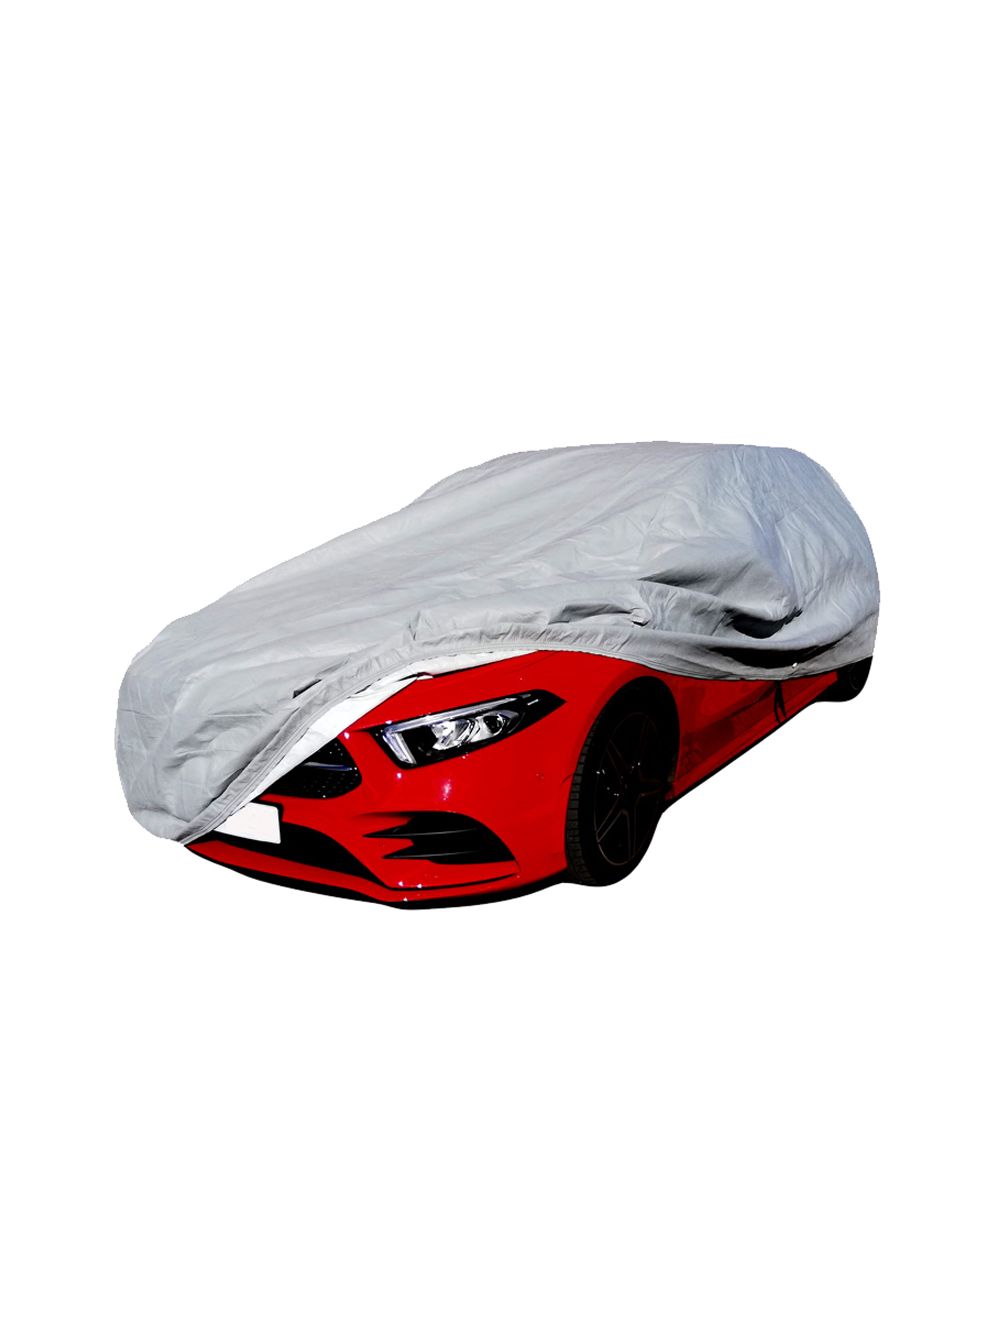 Waterproof Car Covers for Mercedes - Outdoor Car Protection